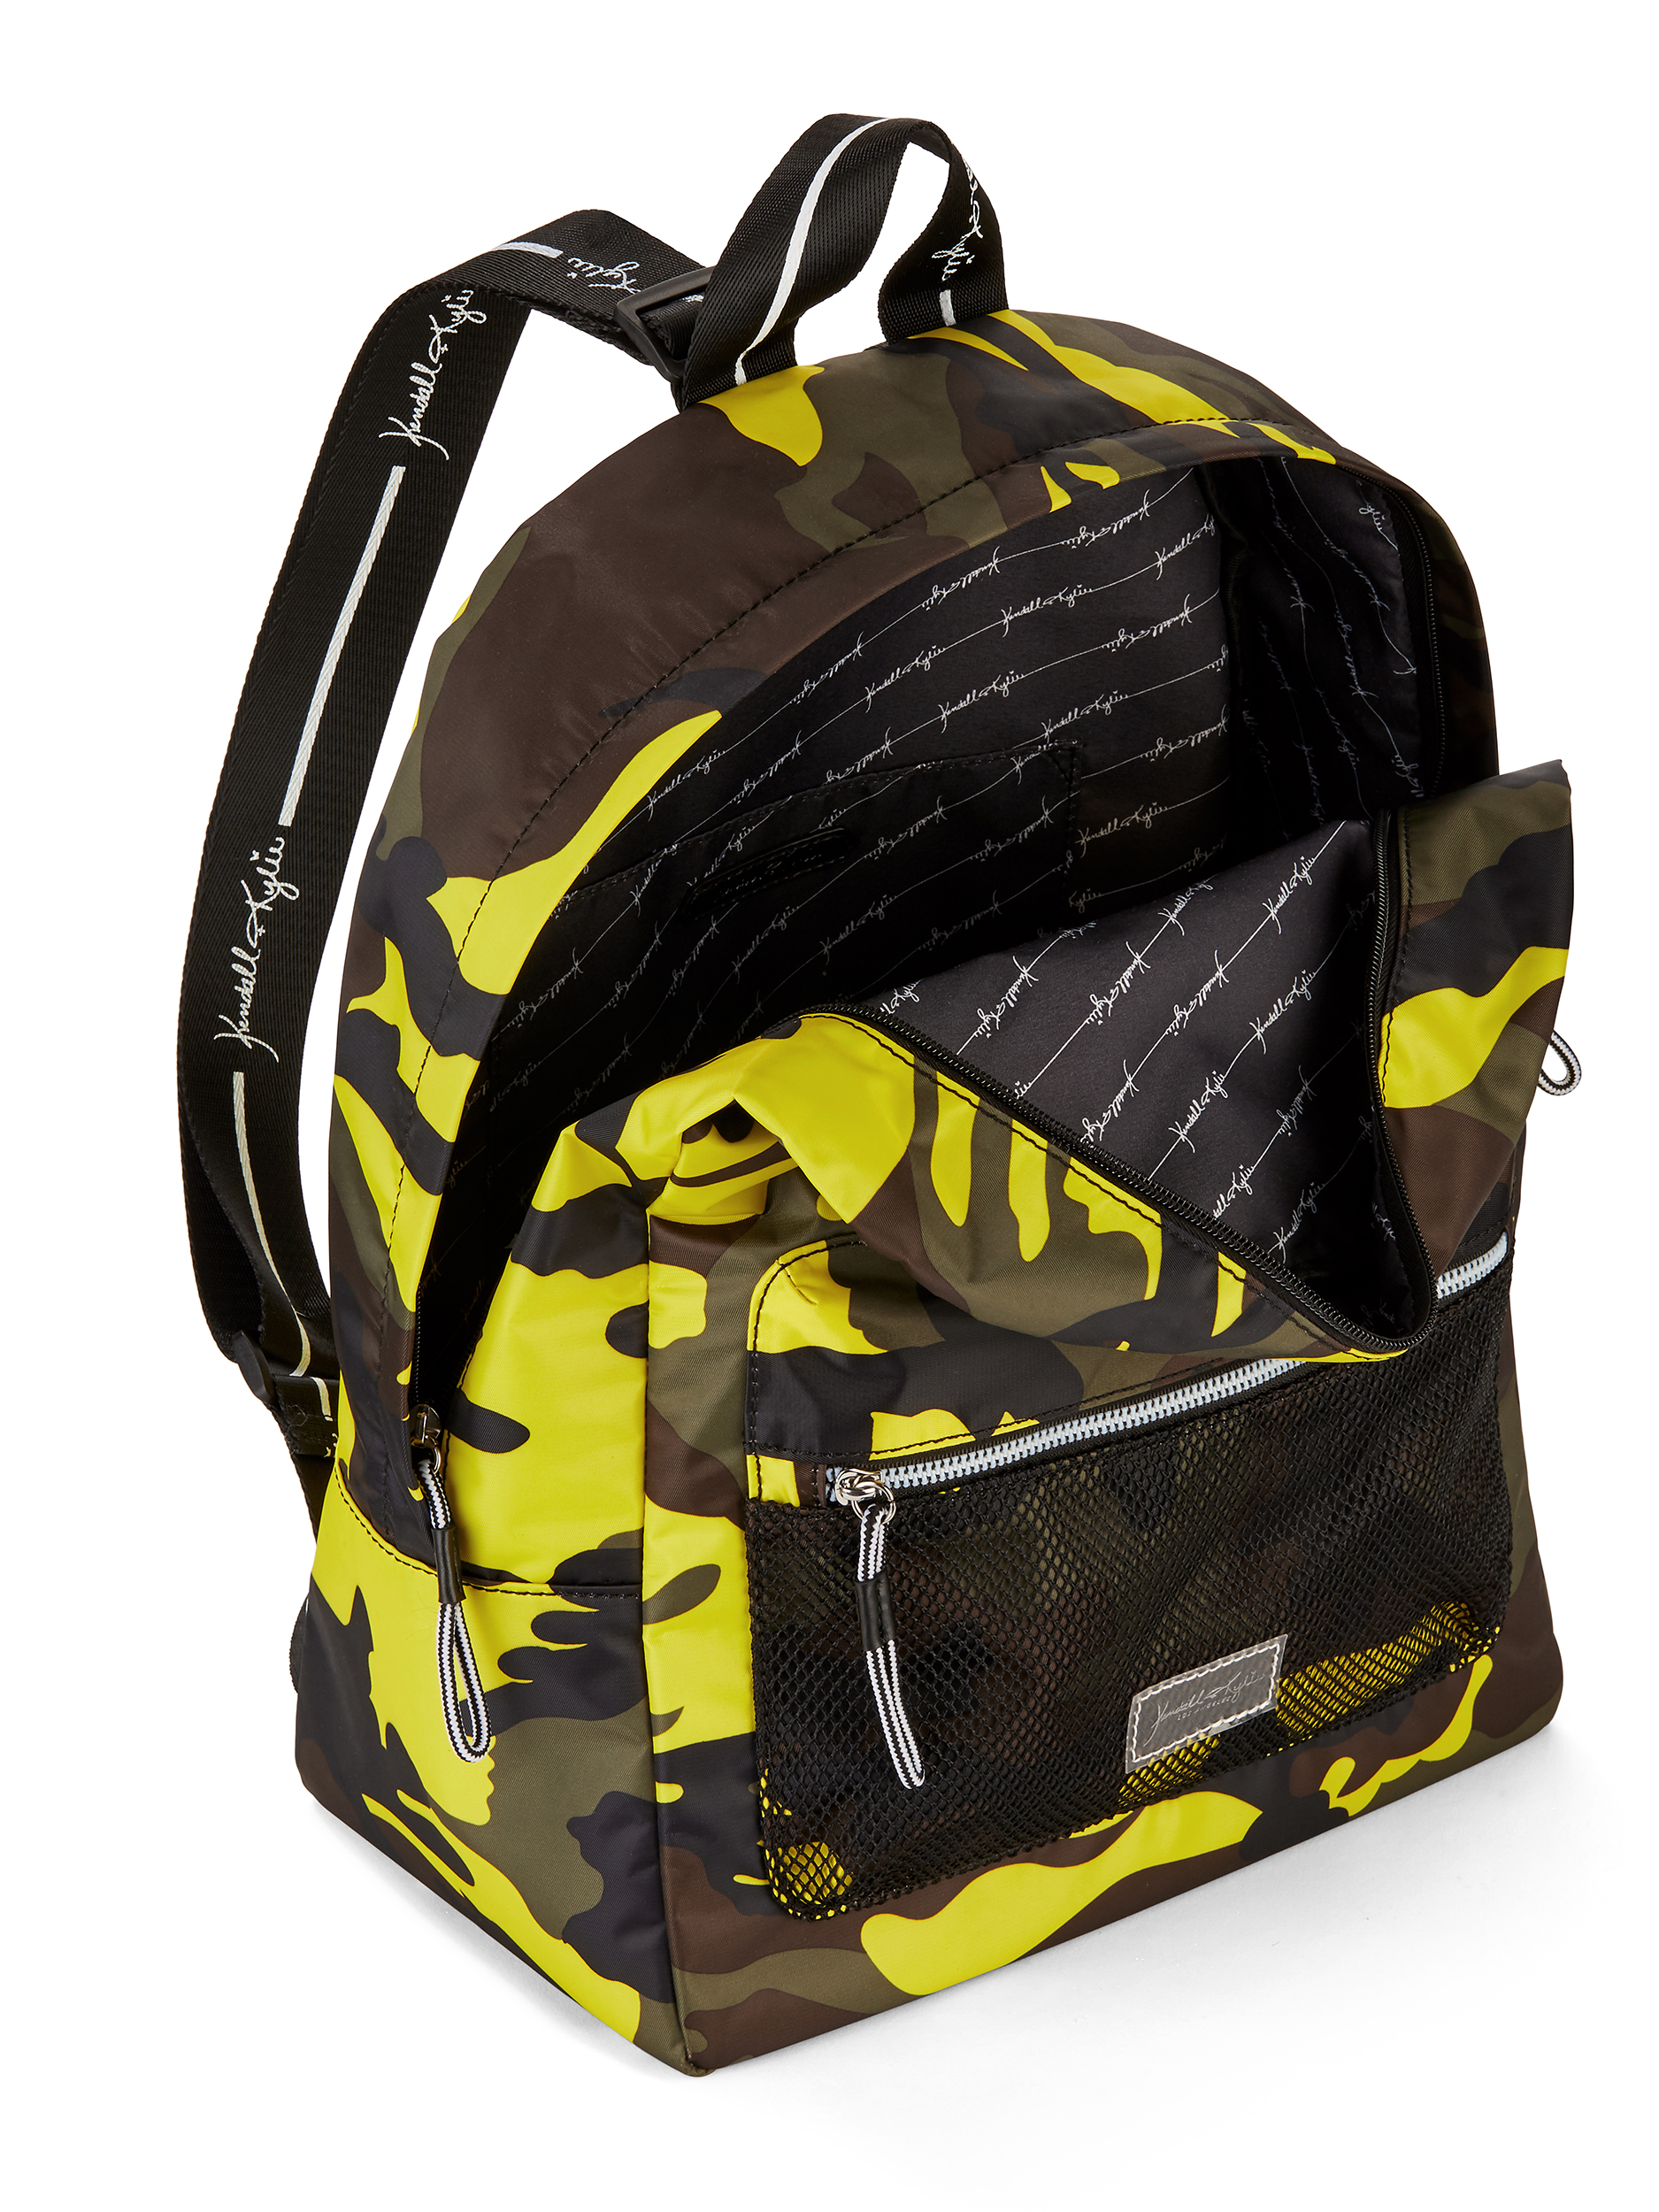 Kendall + Kylie for Walmart Multi Camo Large Backpack - image 4 of 5